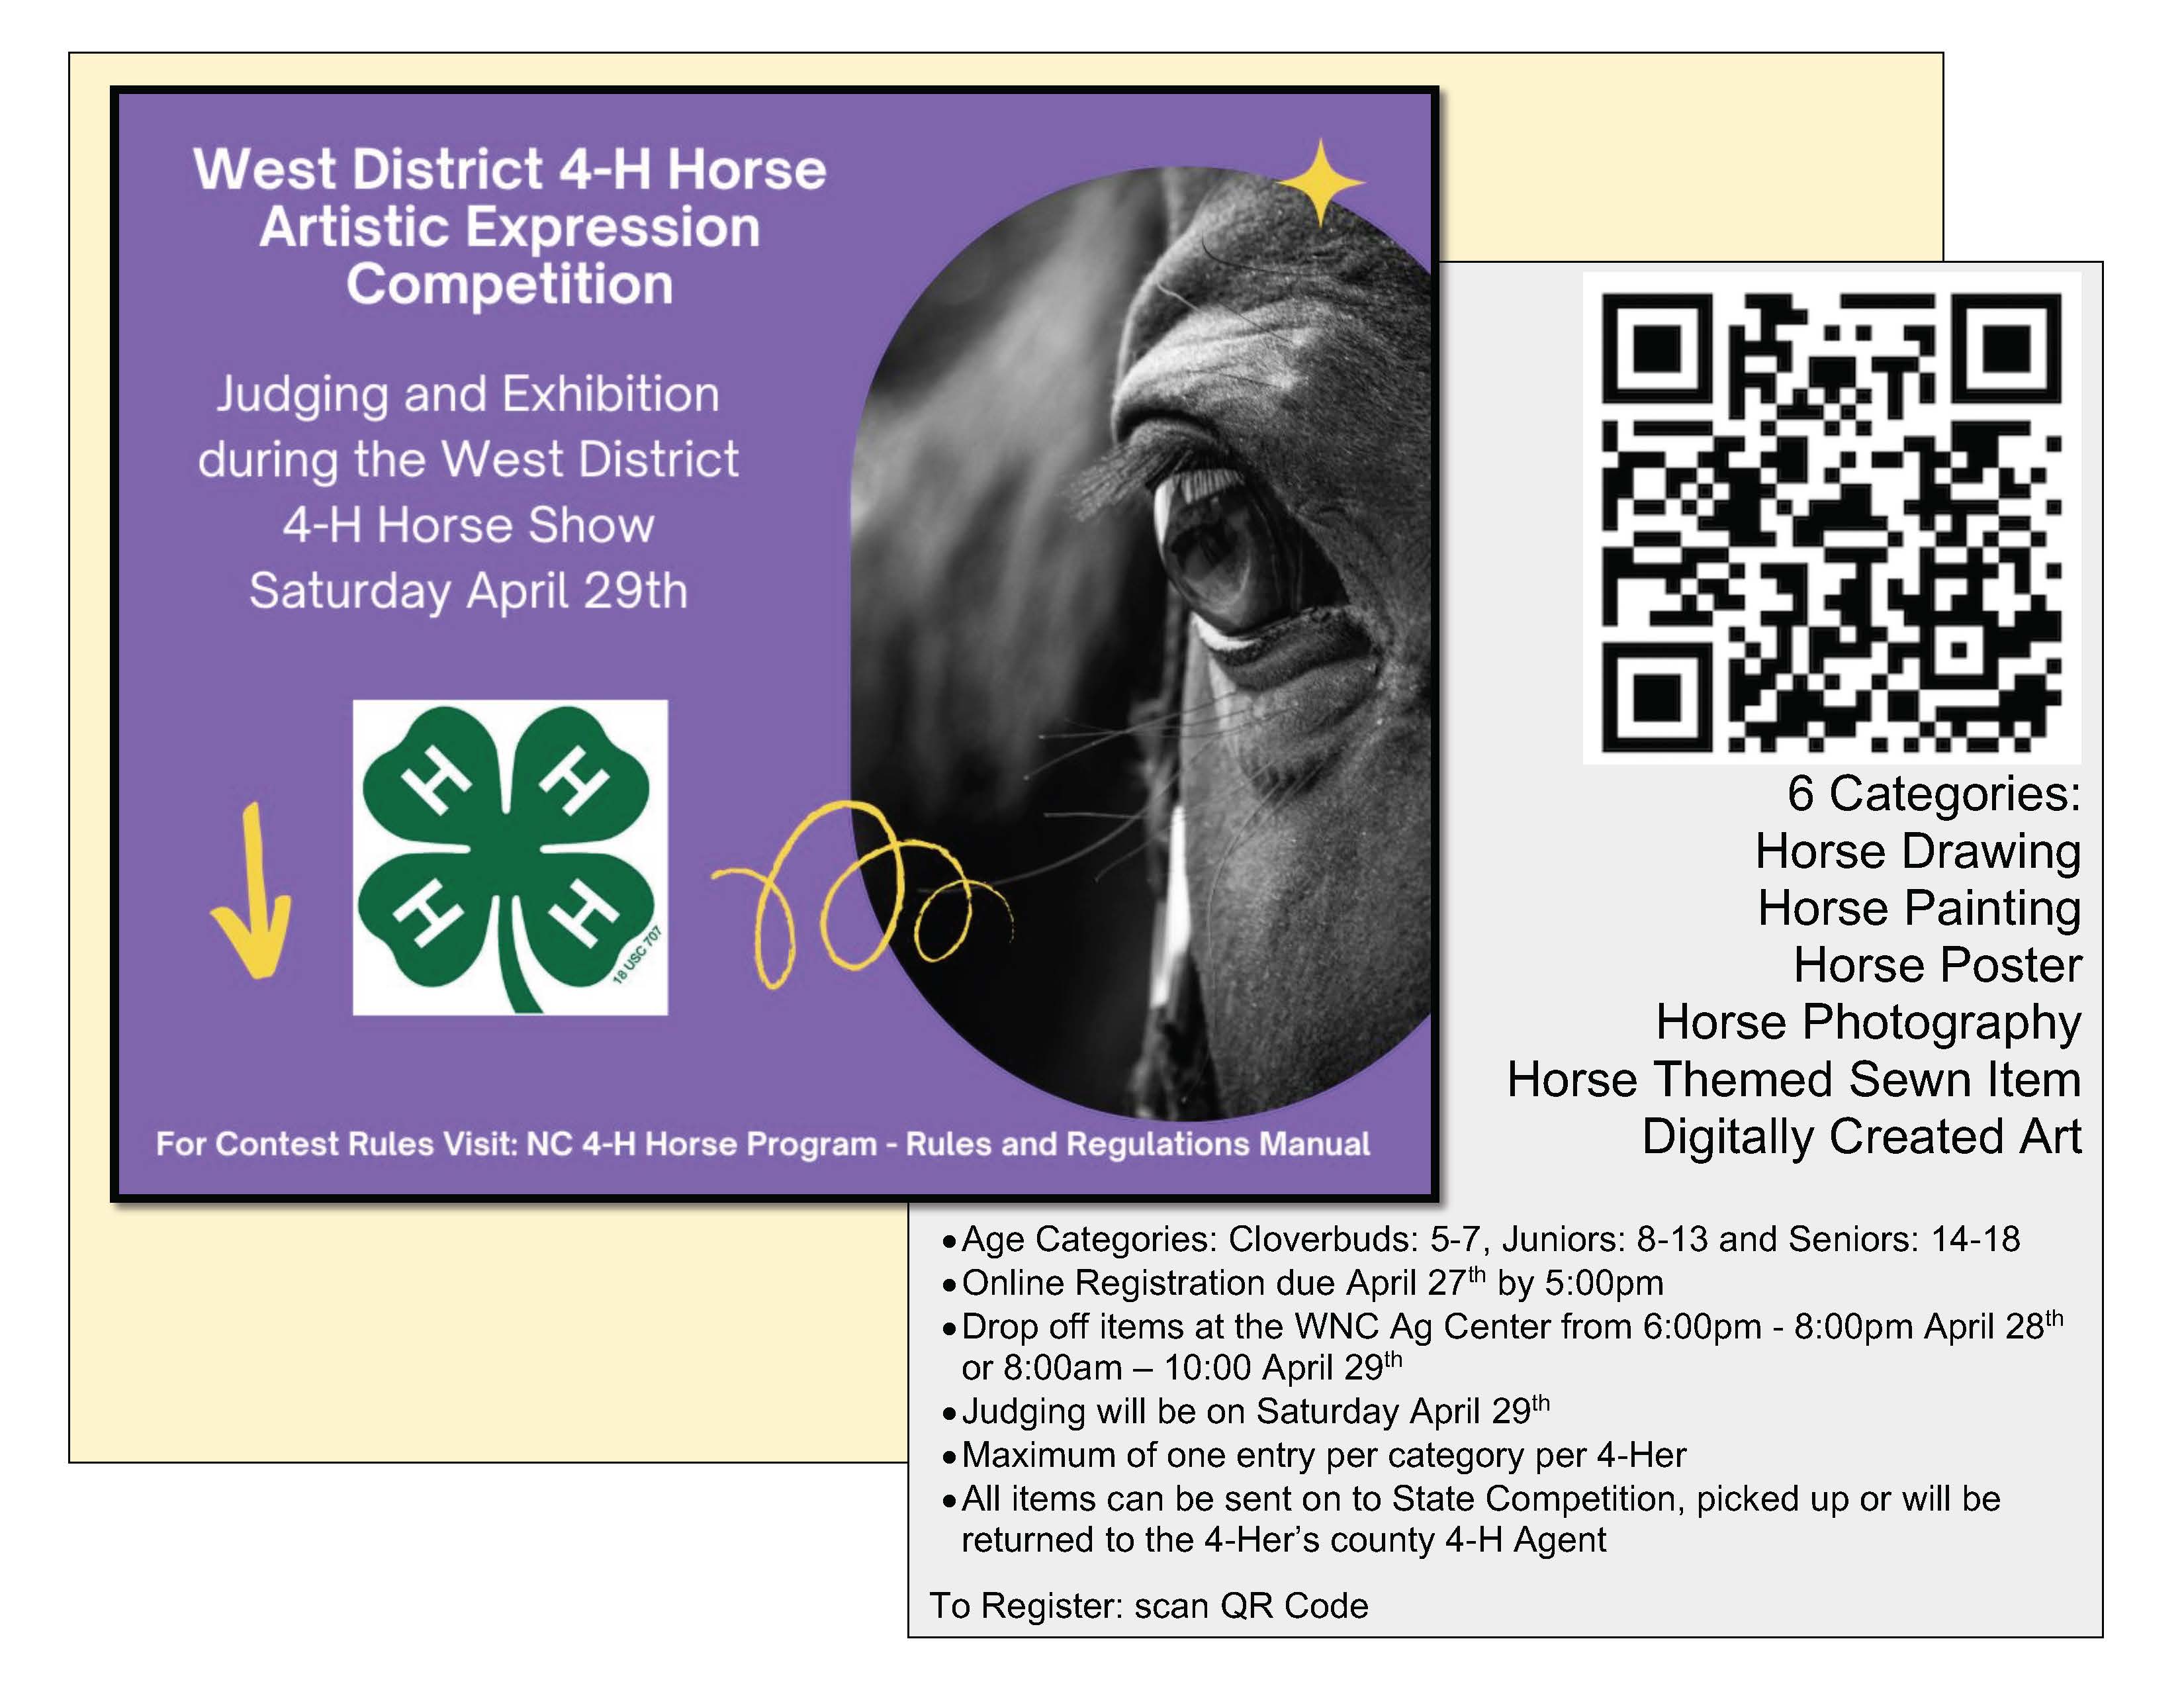 West District 4-H Horse Artistic Expression Competition